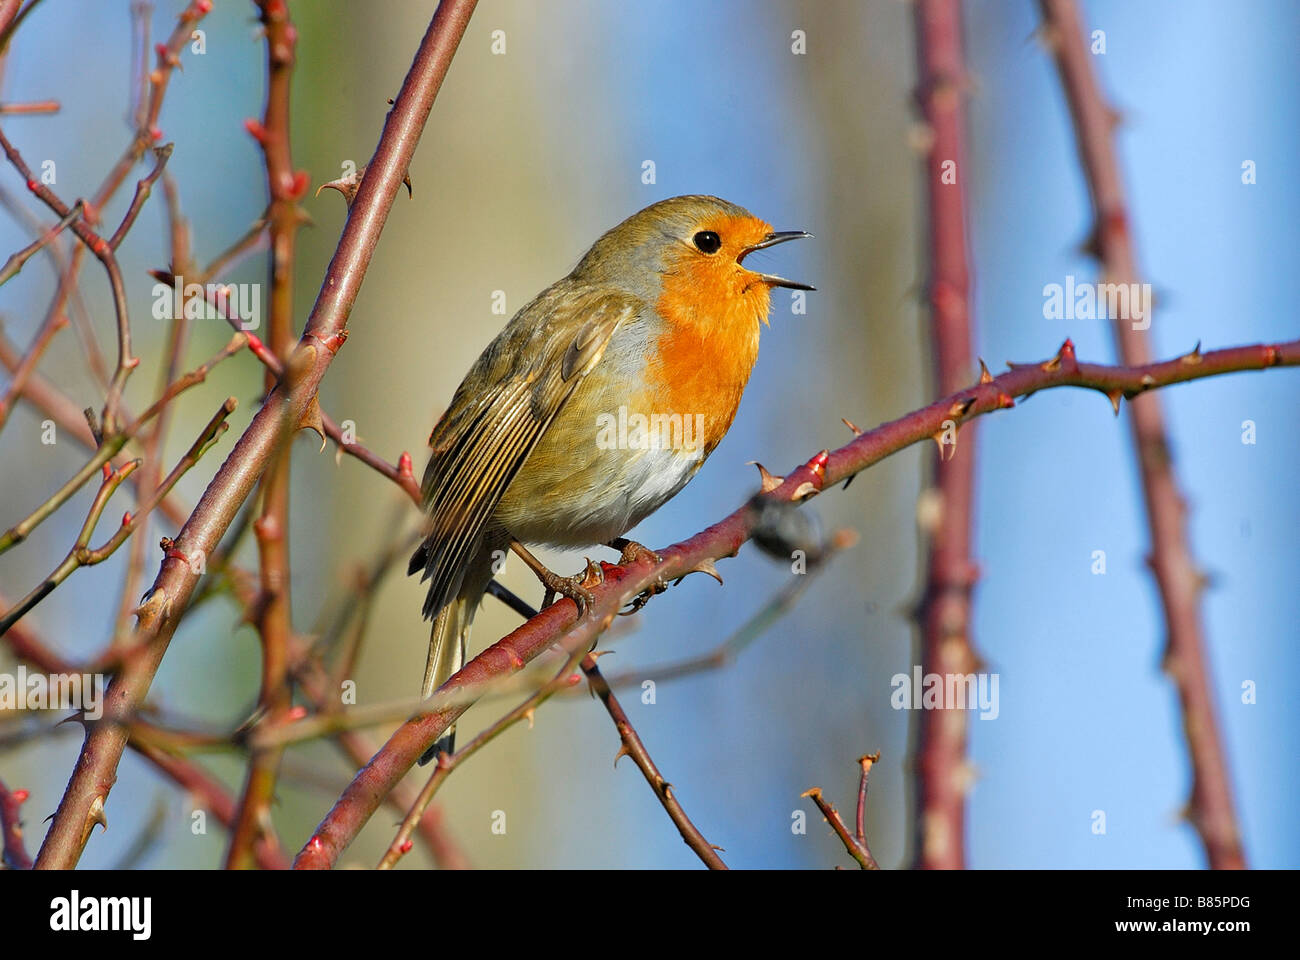 Red breasted robin singing Stock Photo